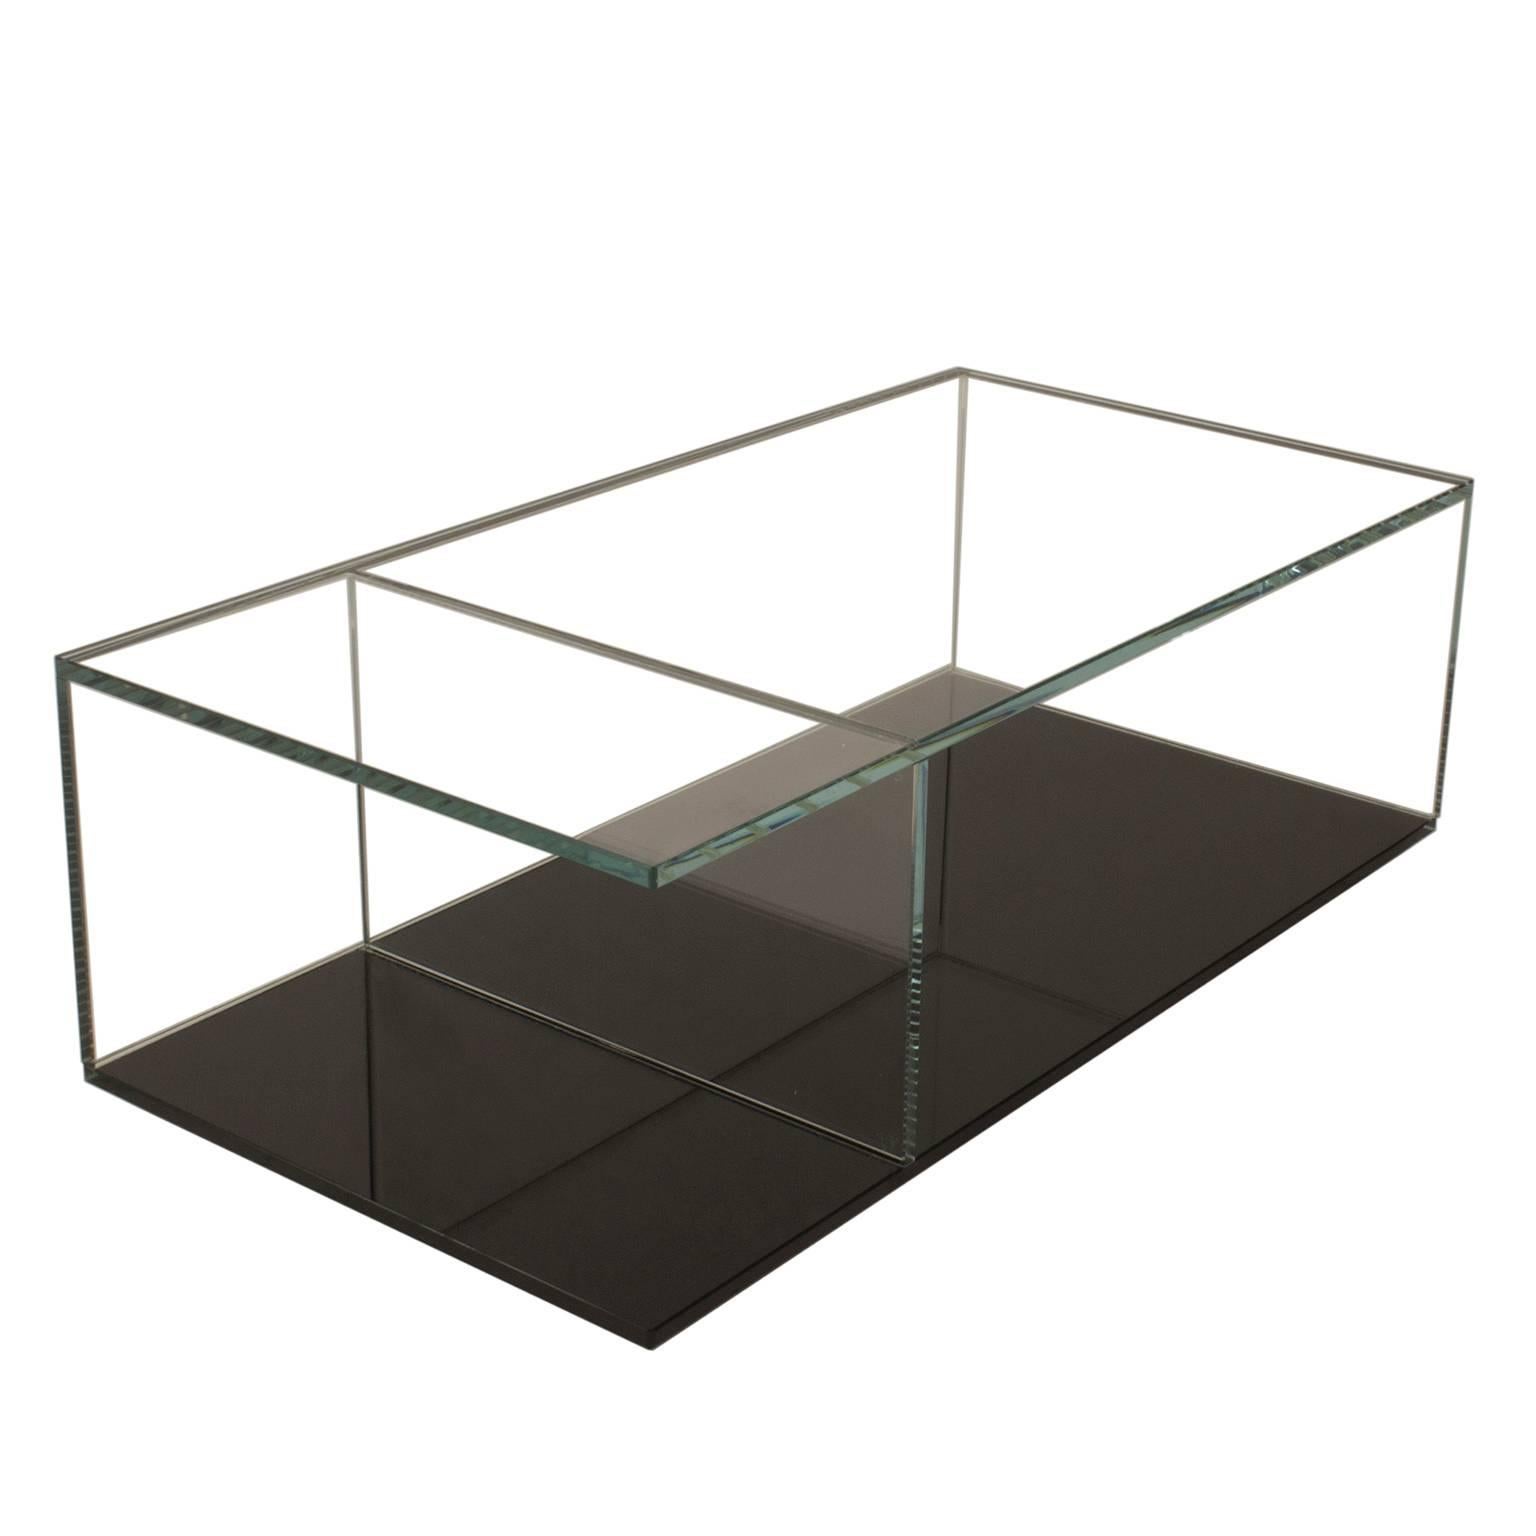 Rectangular low table in tempered transparent extra-clear glass with painted bases. 269 13.